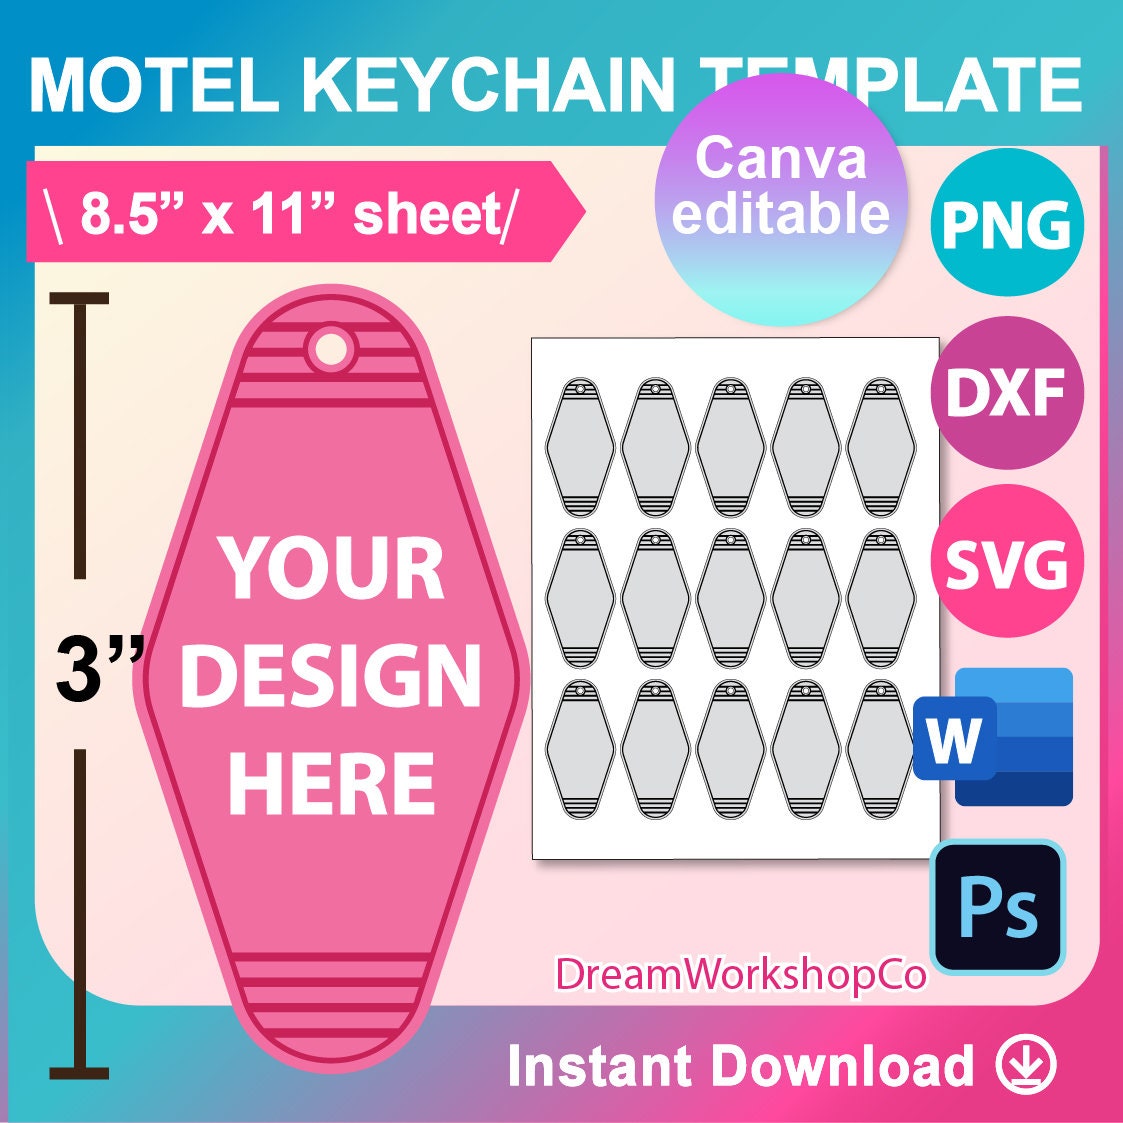 6x2 Keyring Display Card Svg 2.5x5, Keychain Display Card Svg, Shapes PNG  DXF Pdf Eps Files for Cricut and Silhouette, Instant Download 